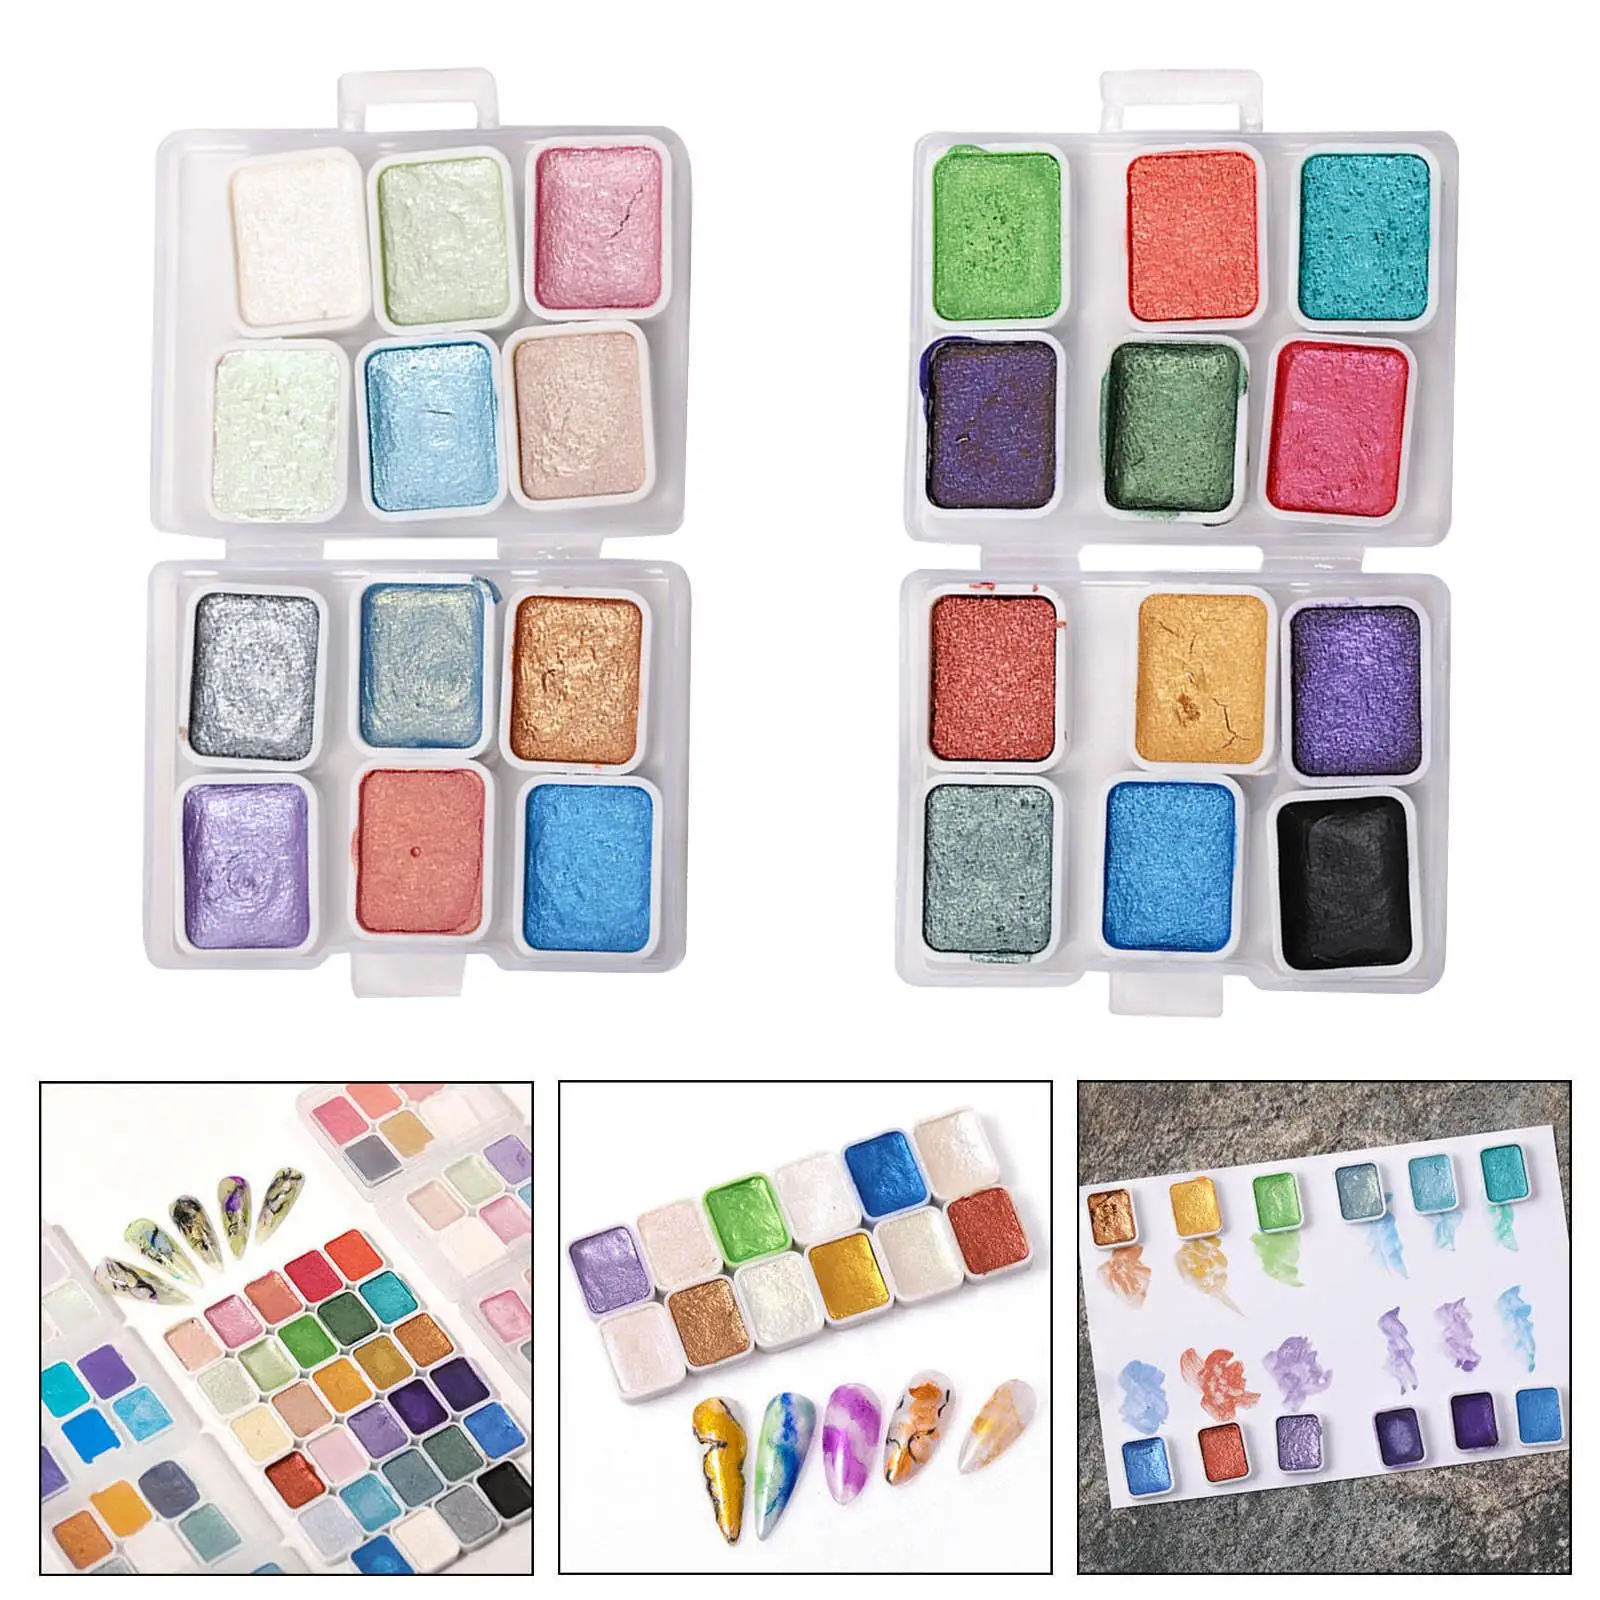 Watercolor Paints Set Lightweight Portable Nail Art Pigments for Manicure Decor Outdoor Painting DIY Home School Painting Lovers